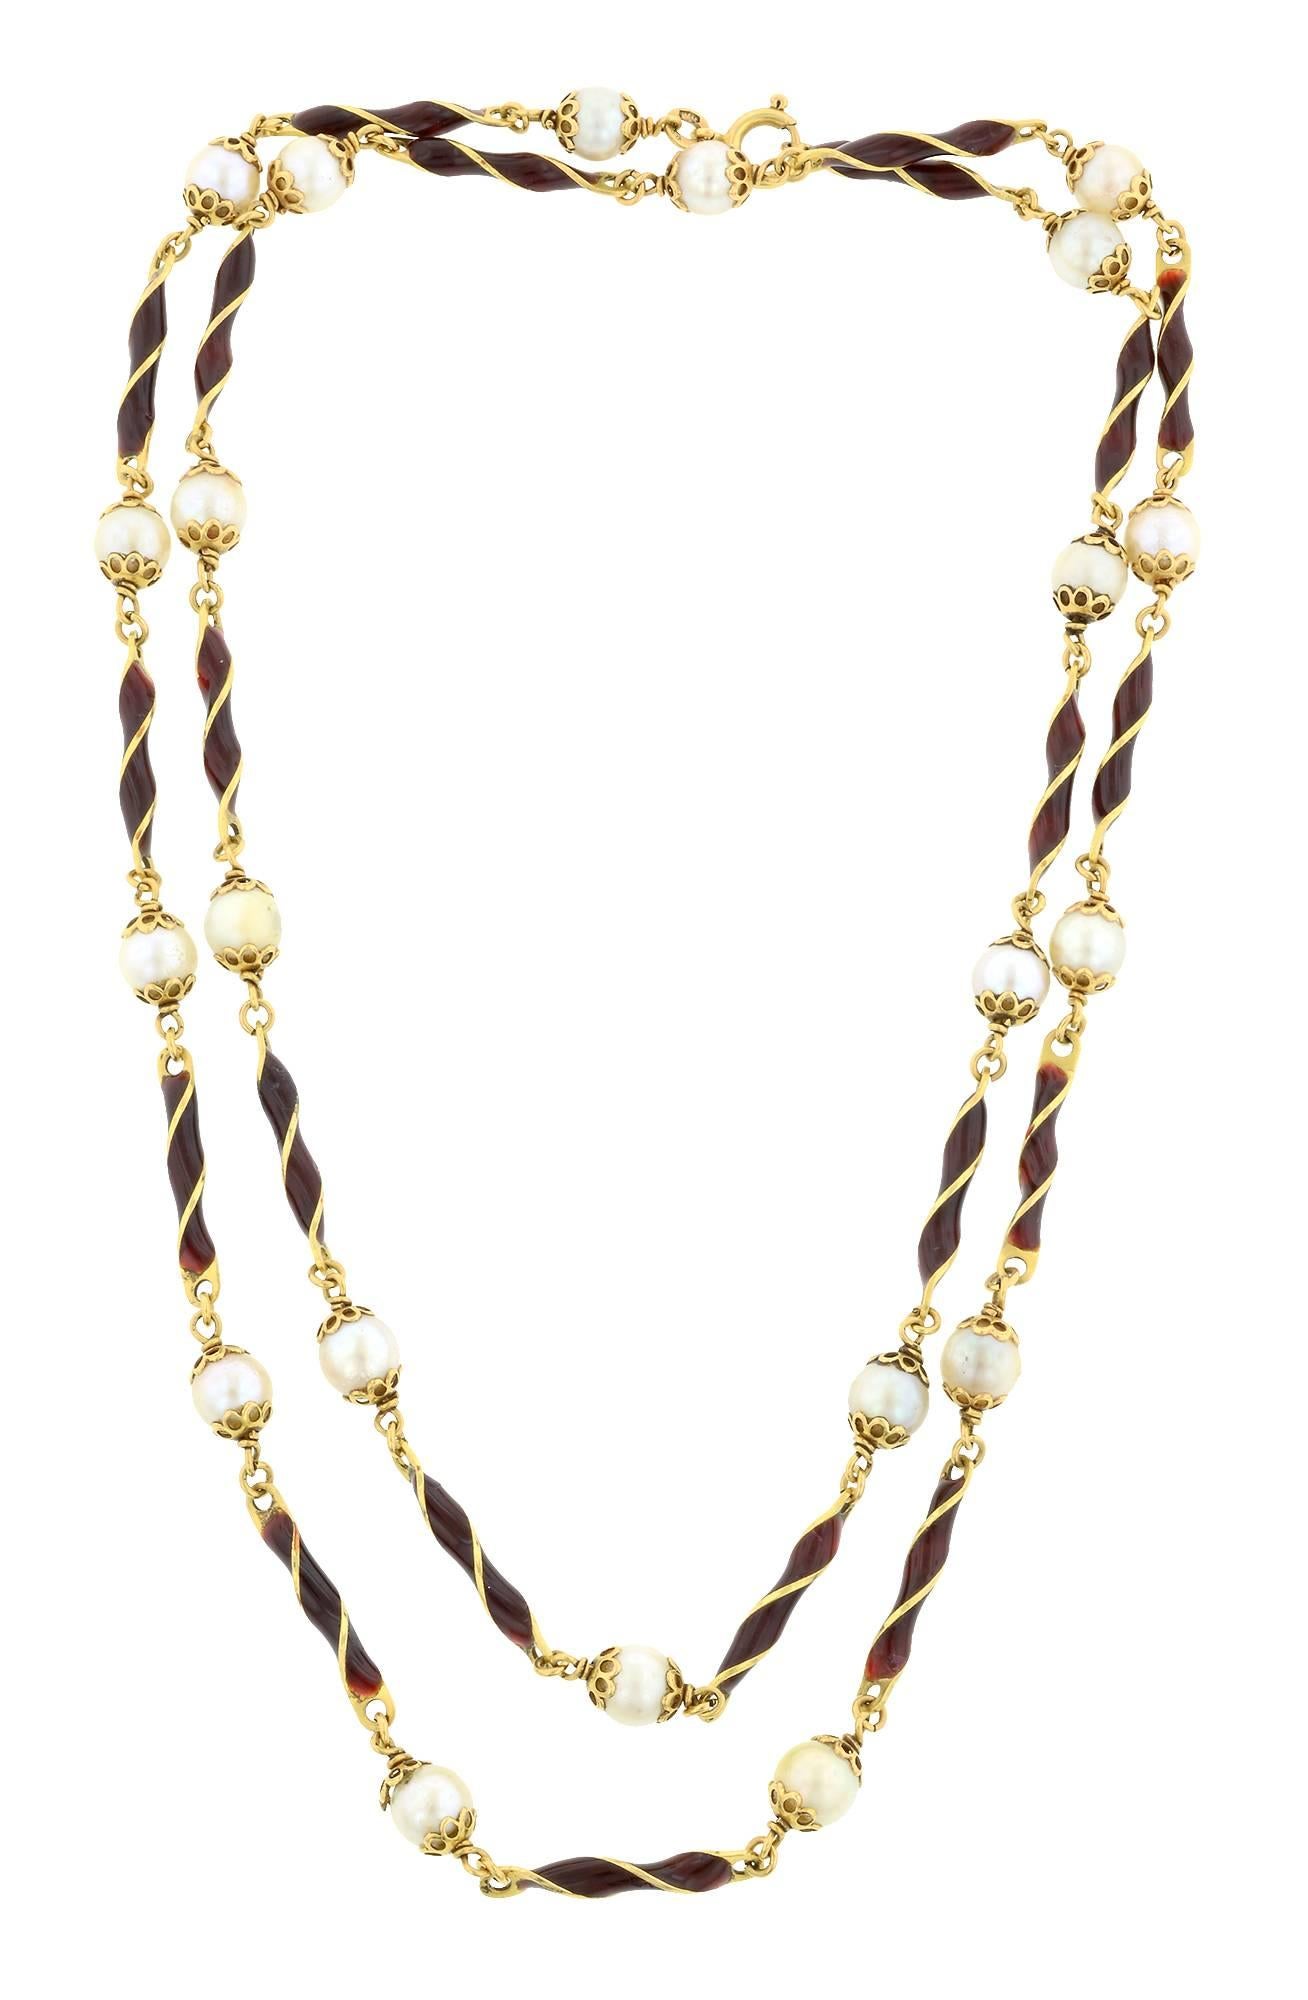 Vintage cultured pearl & red enamel long chain necklace with alternating twisted red enamel links and pearls*, fashioned in 18k gold.  Italian hallmarks. Circa 1960. Length 30 inches.
